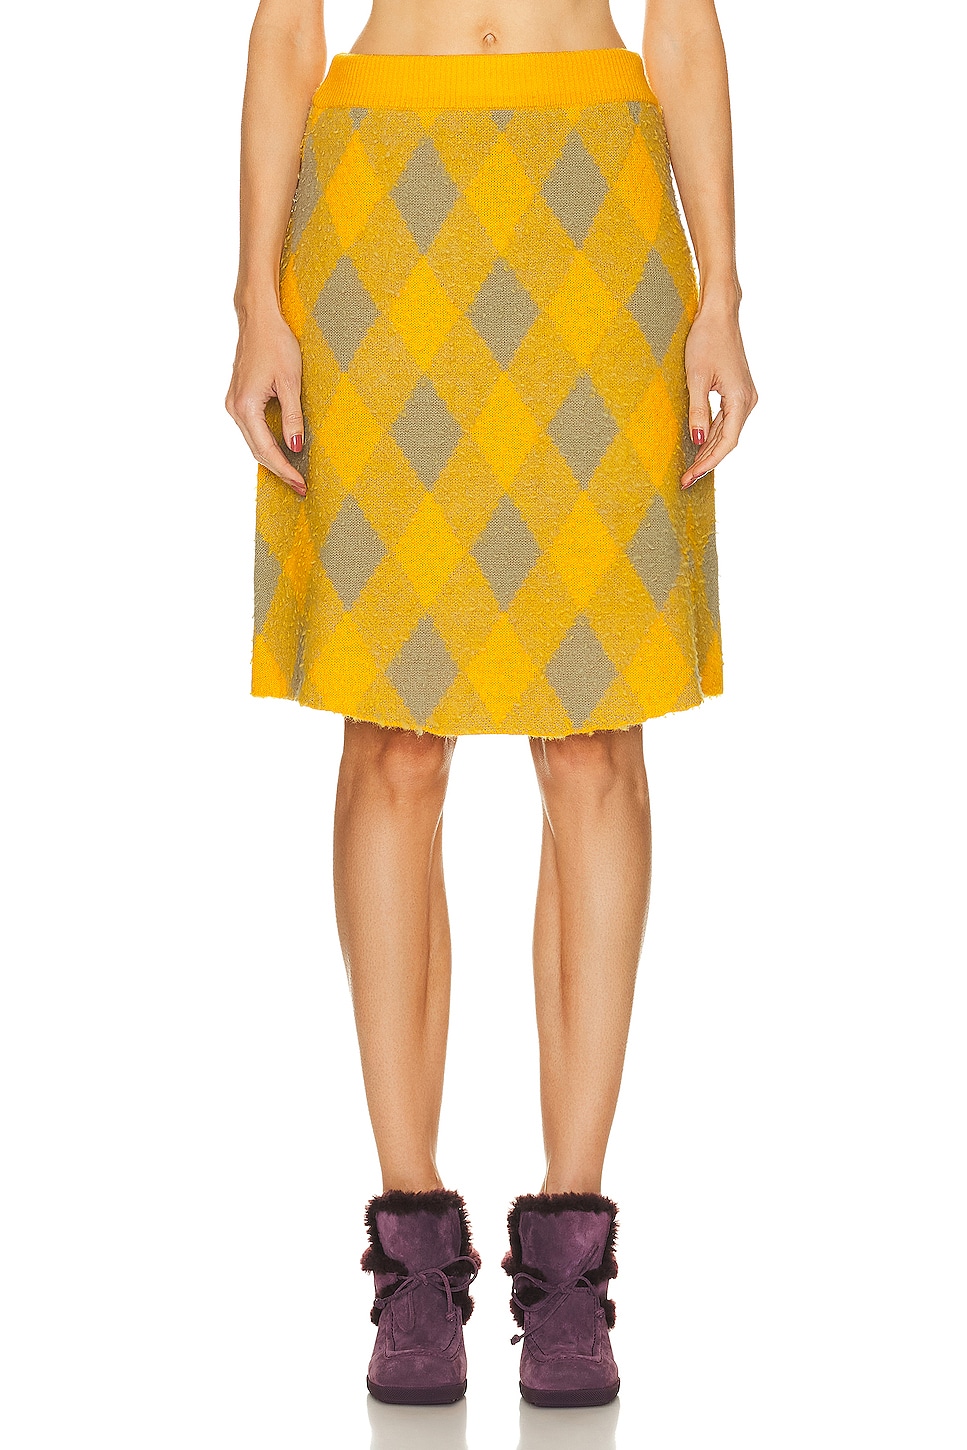 Image 1 of Burberry Argyle Skirt in Mimosa IP Pattern